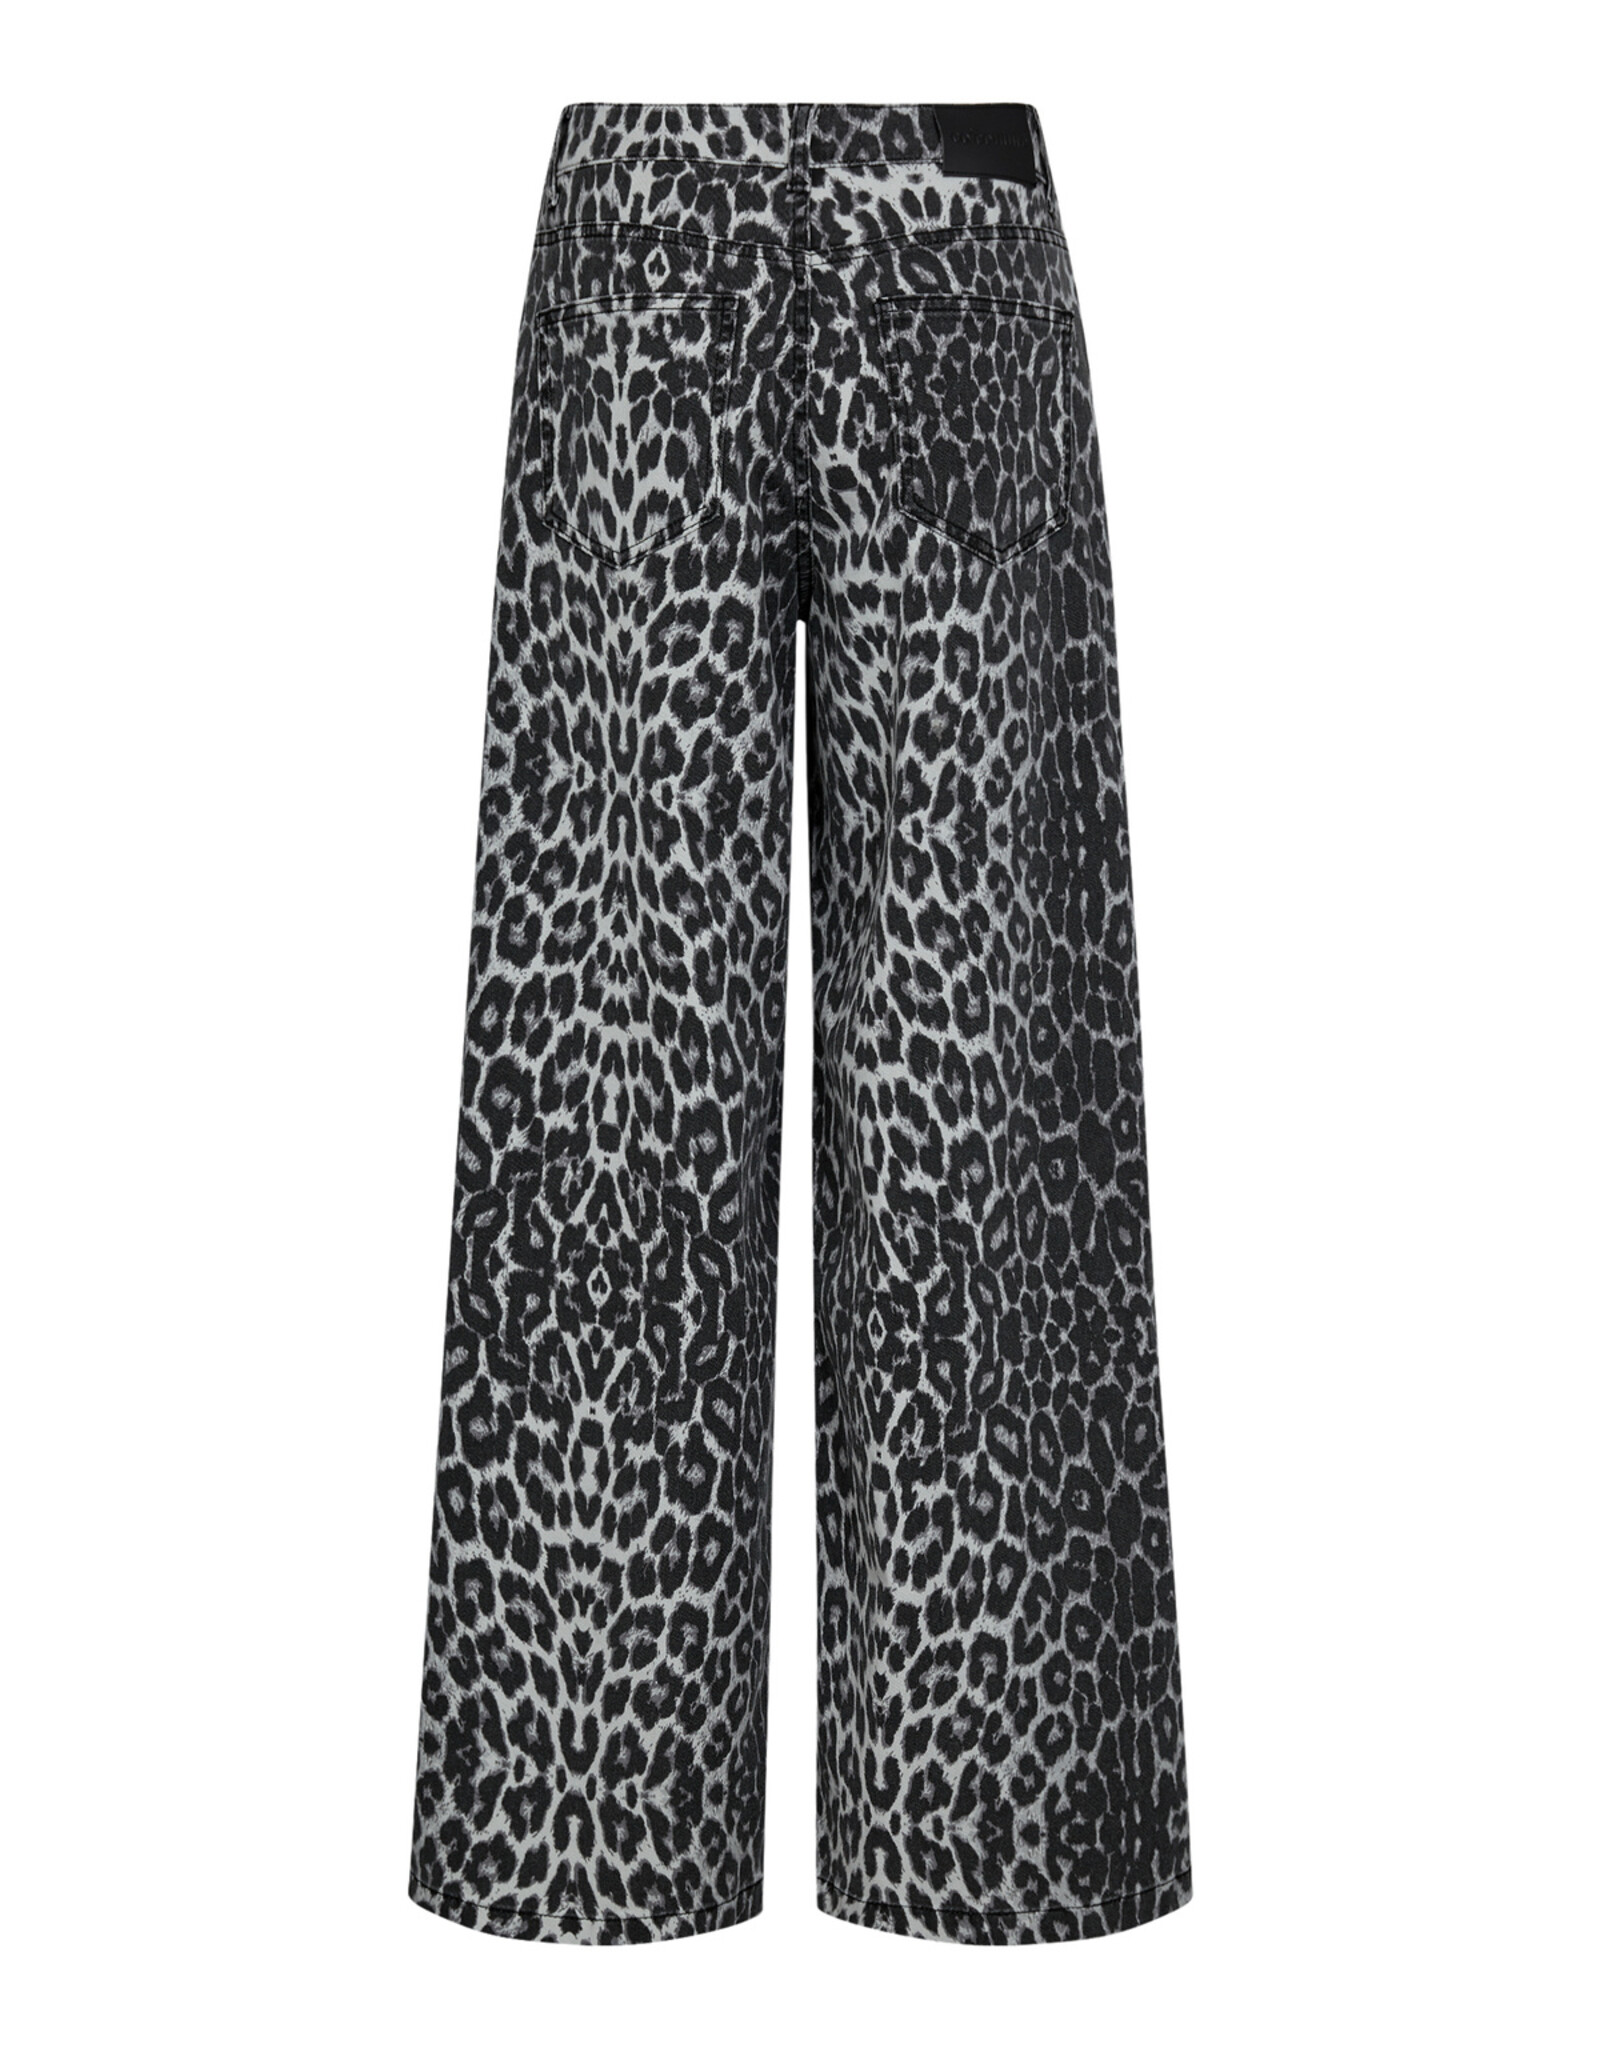 Co'Couture Leo Wide Long Pant Dark Grey